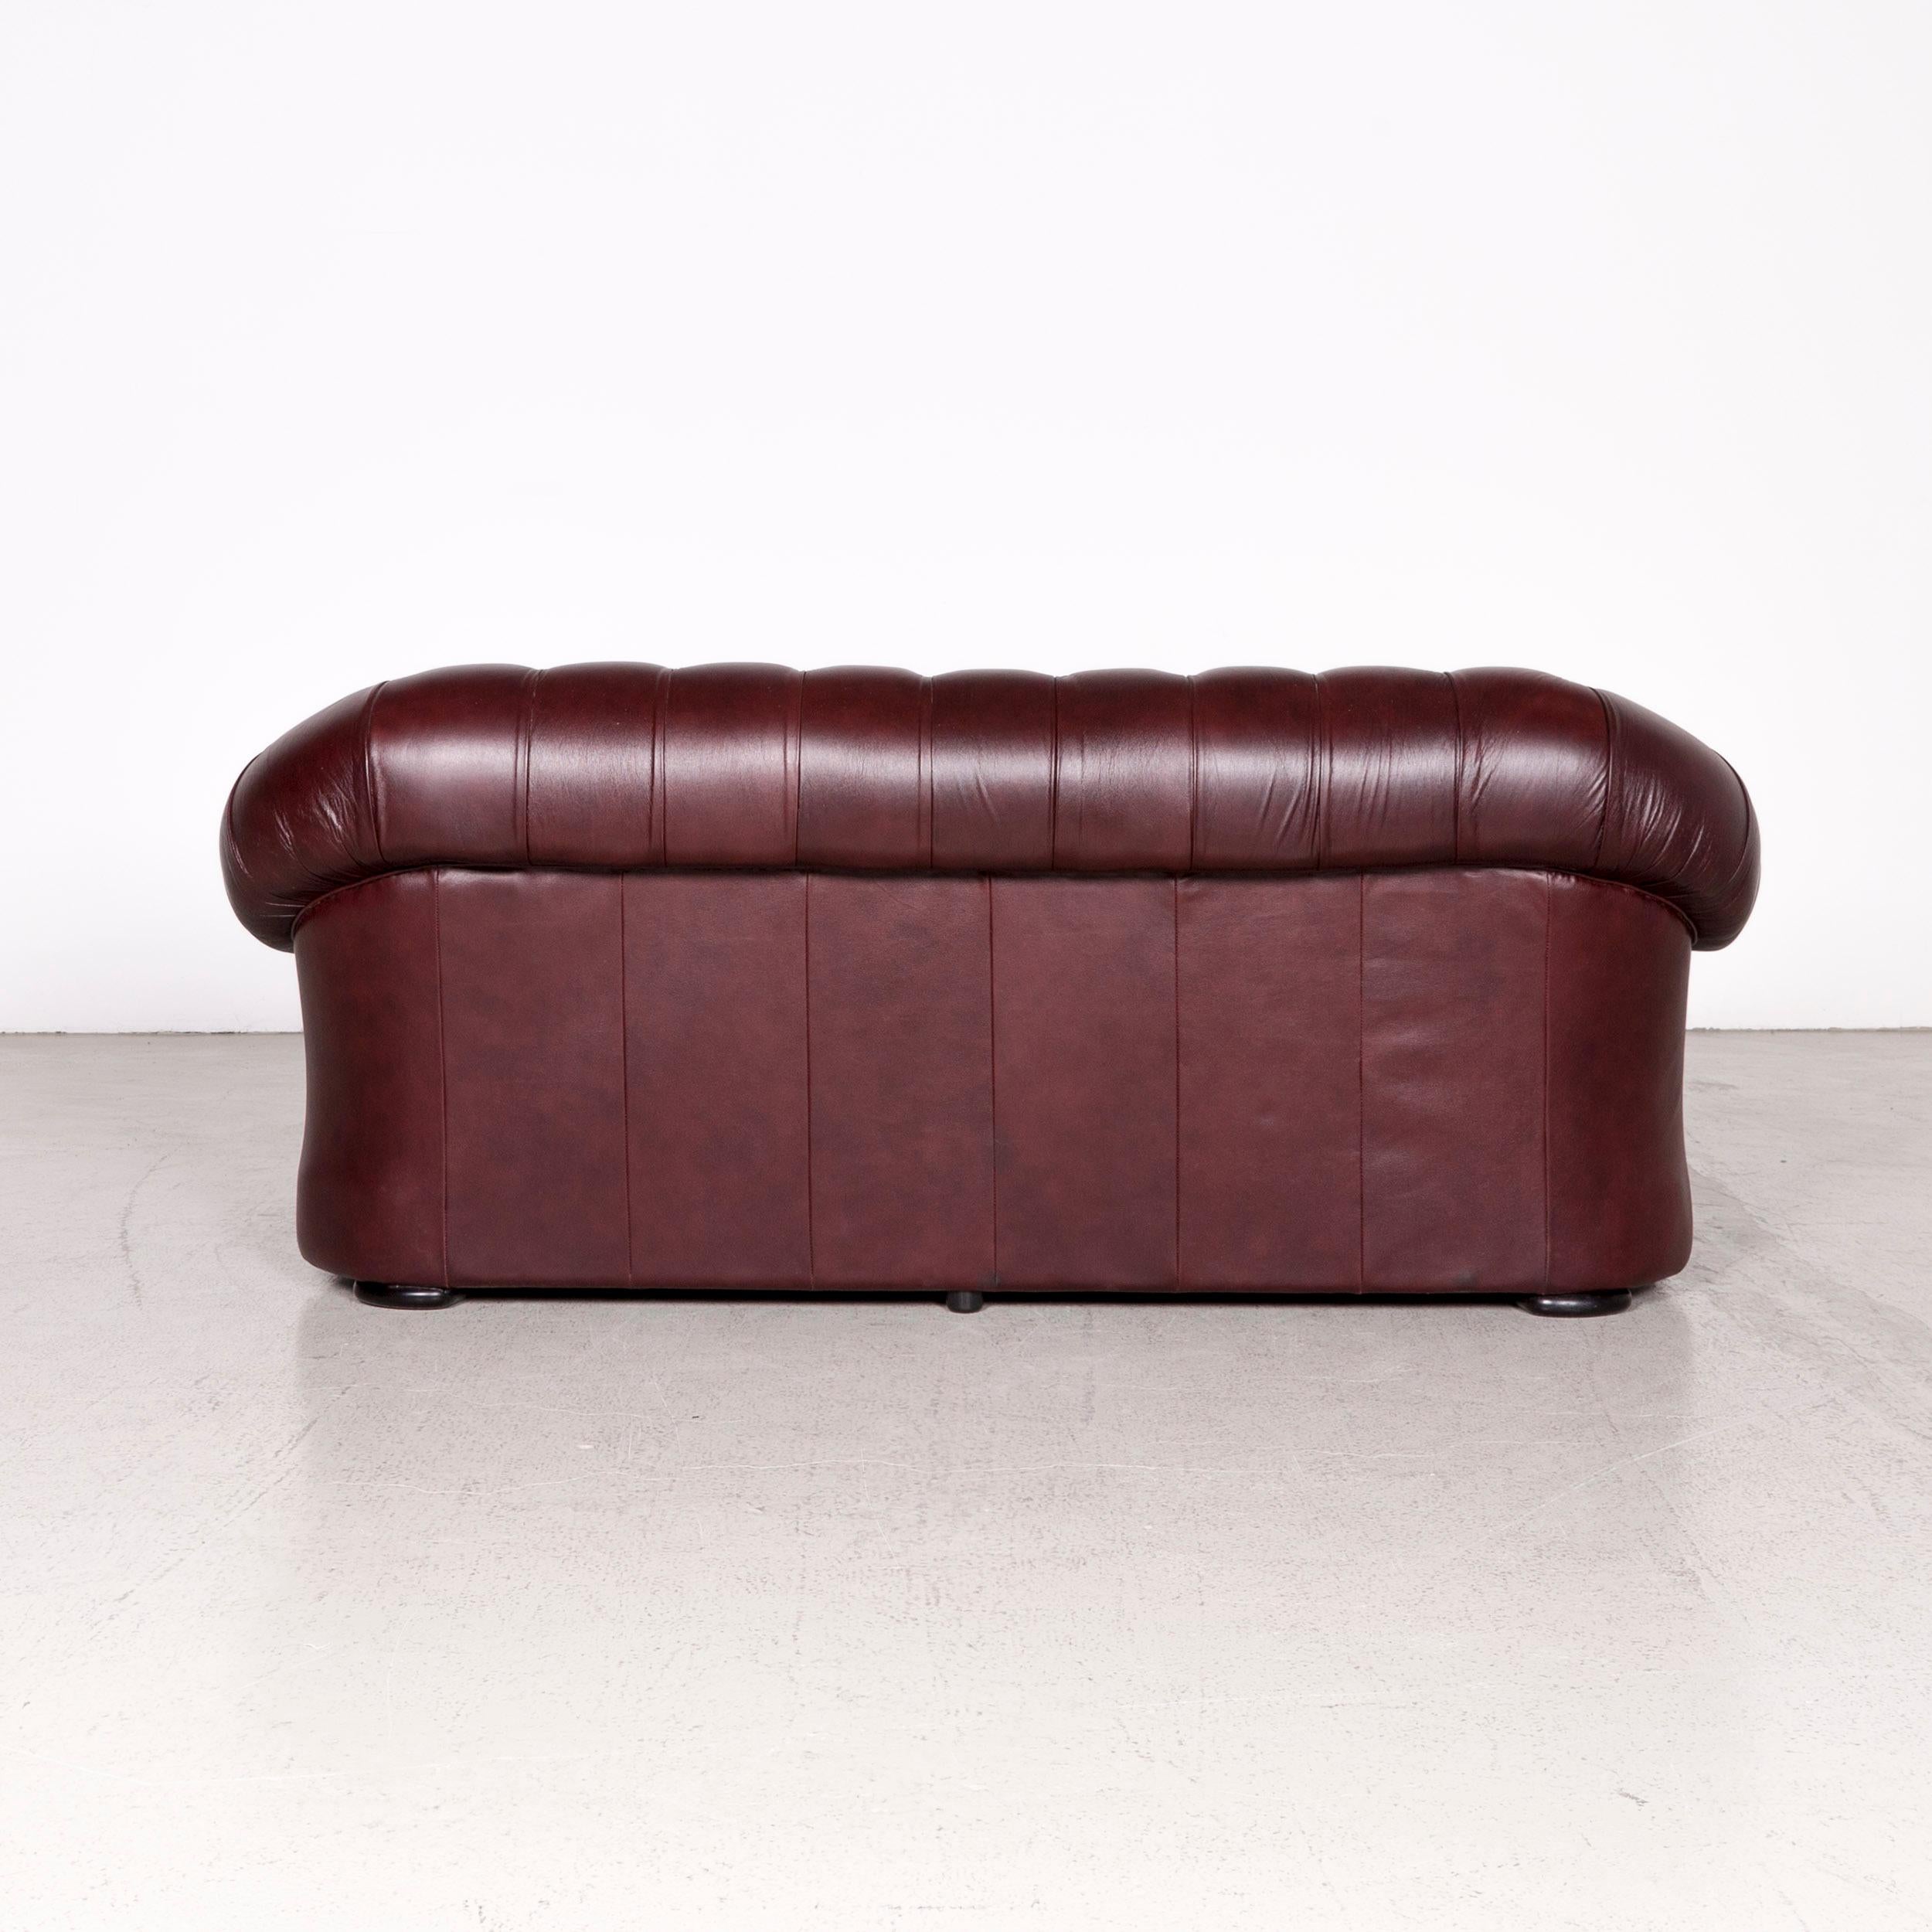 Contemporary Chesterfield Leather Sofa Red Genuine Leather Three-Seater Couch Vintage Retro For Sale